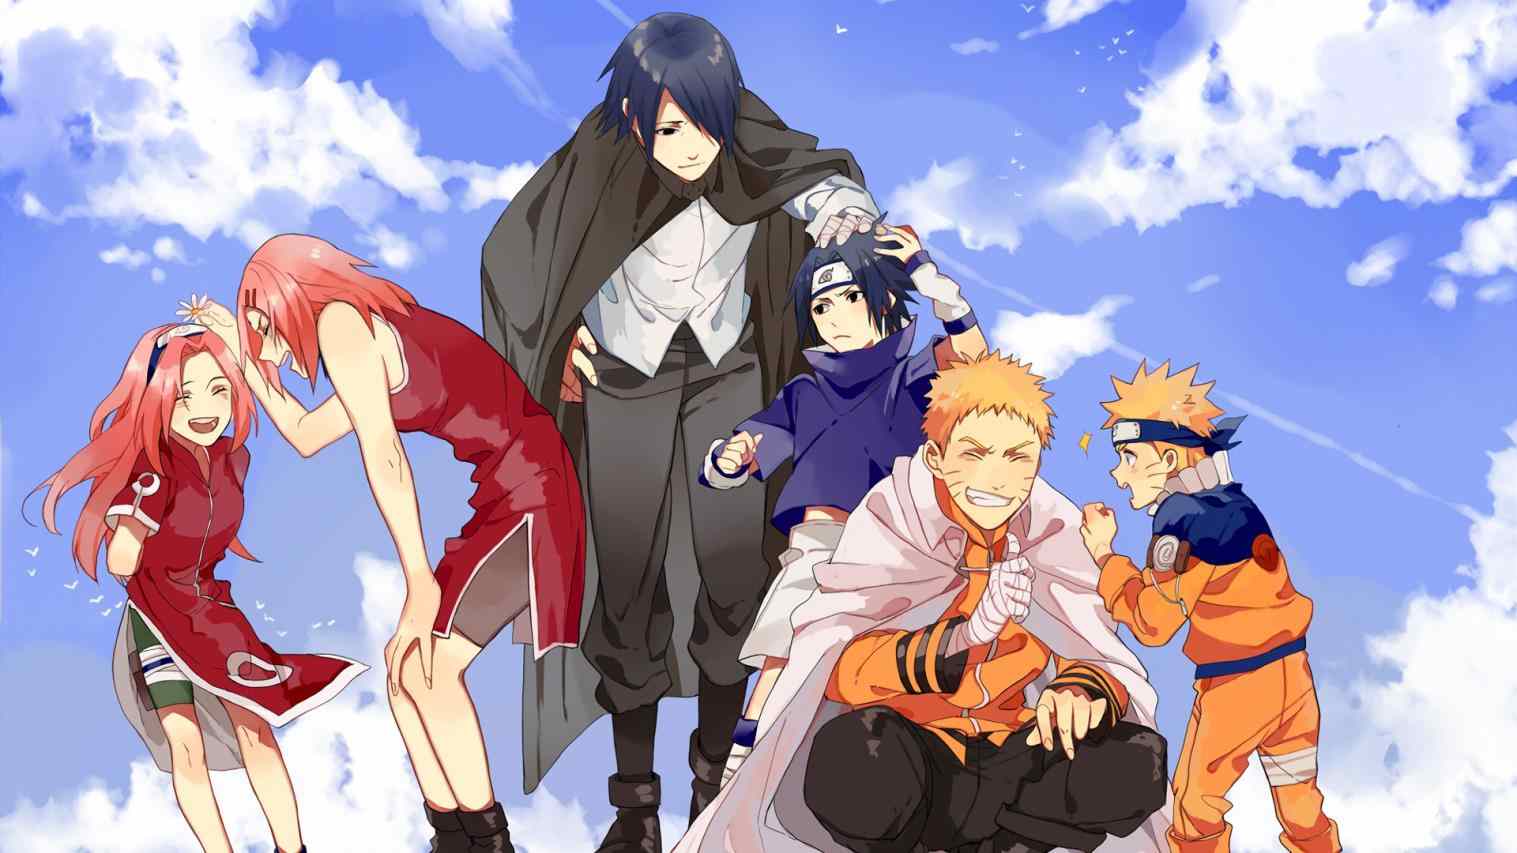 11 Sasuke Curse Mark Wallpapers for iPhone and Android by Elizabeth Velez